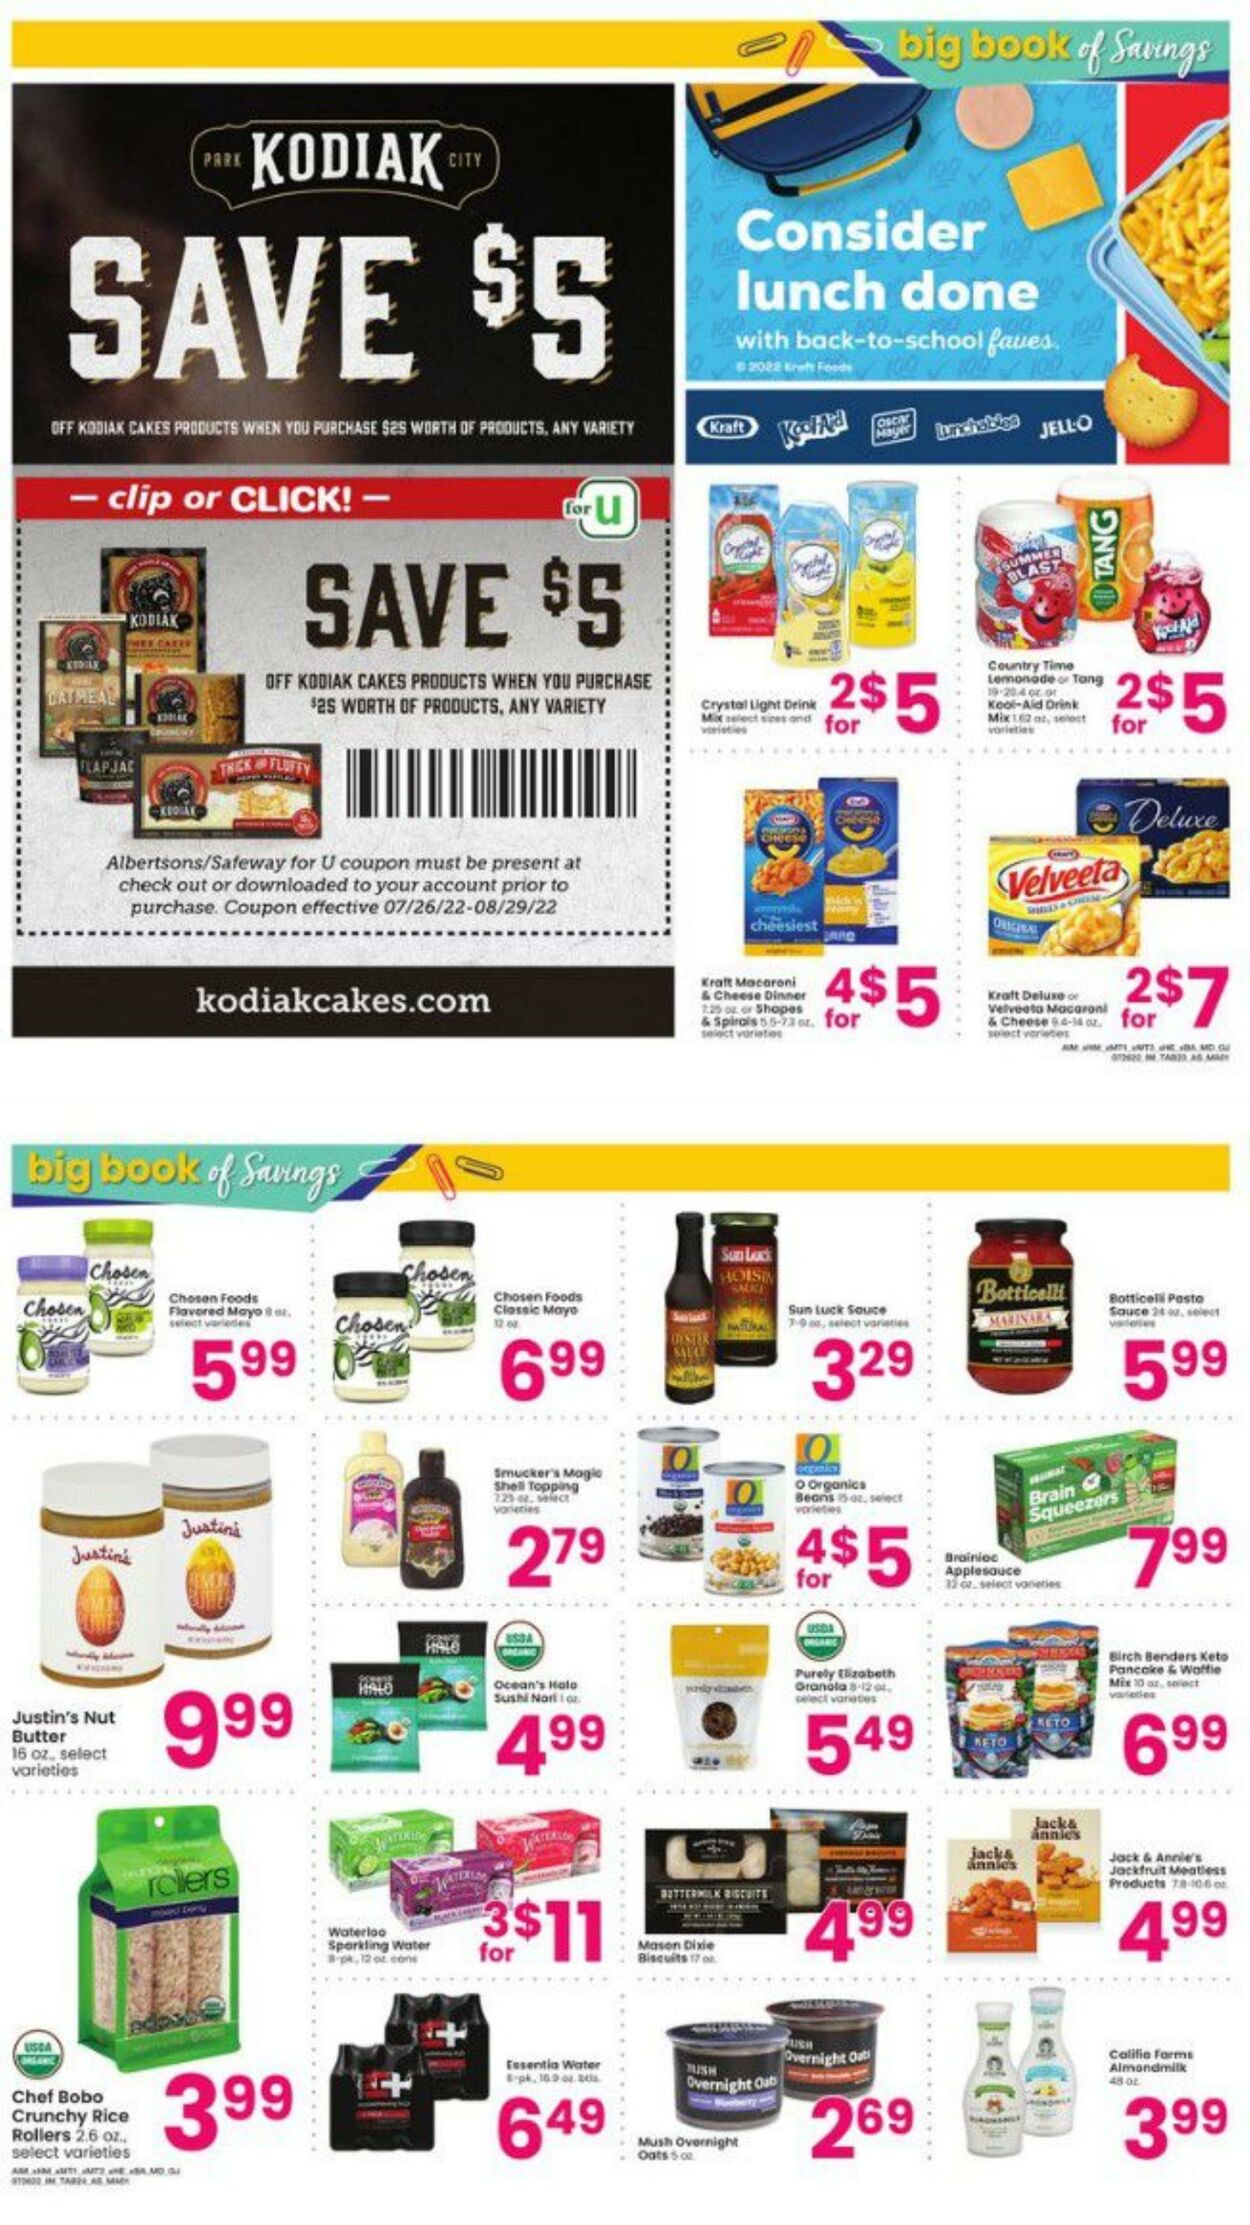 Weekly ad Albertsons 07/26/2022 - 08/29/2022